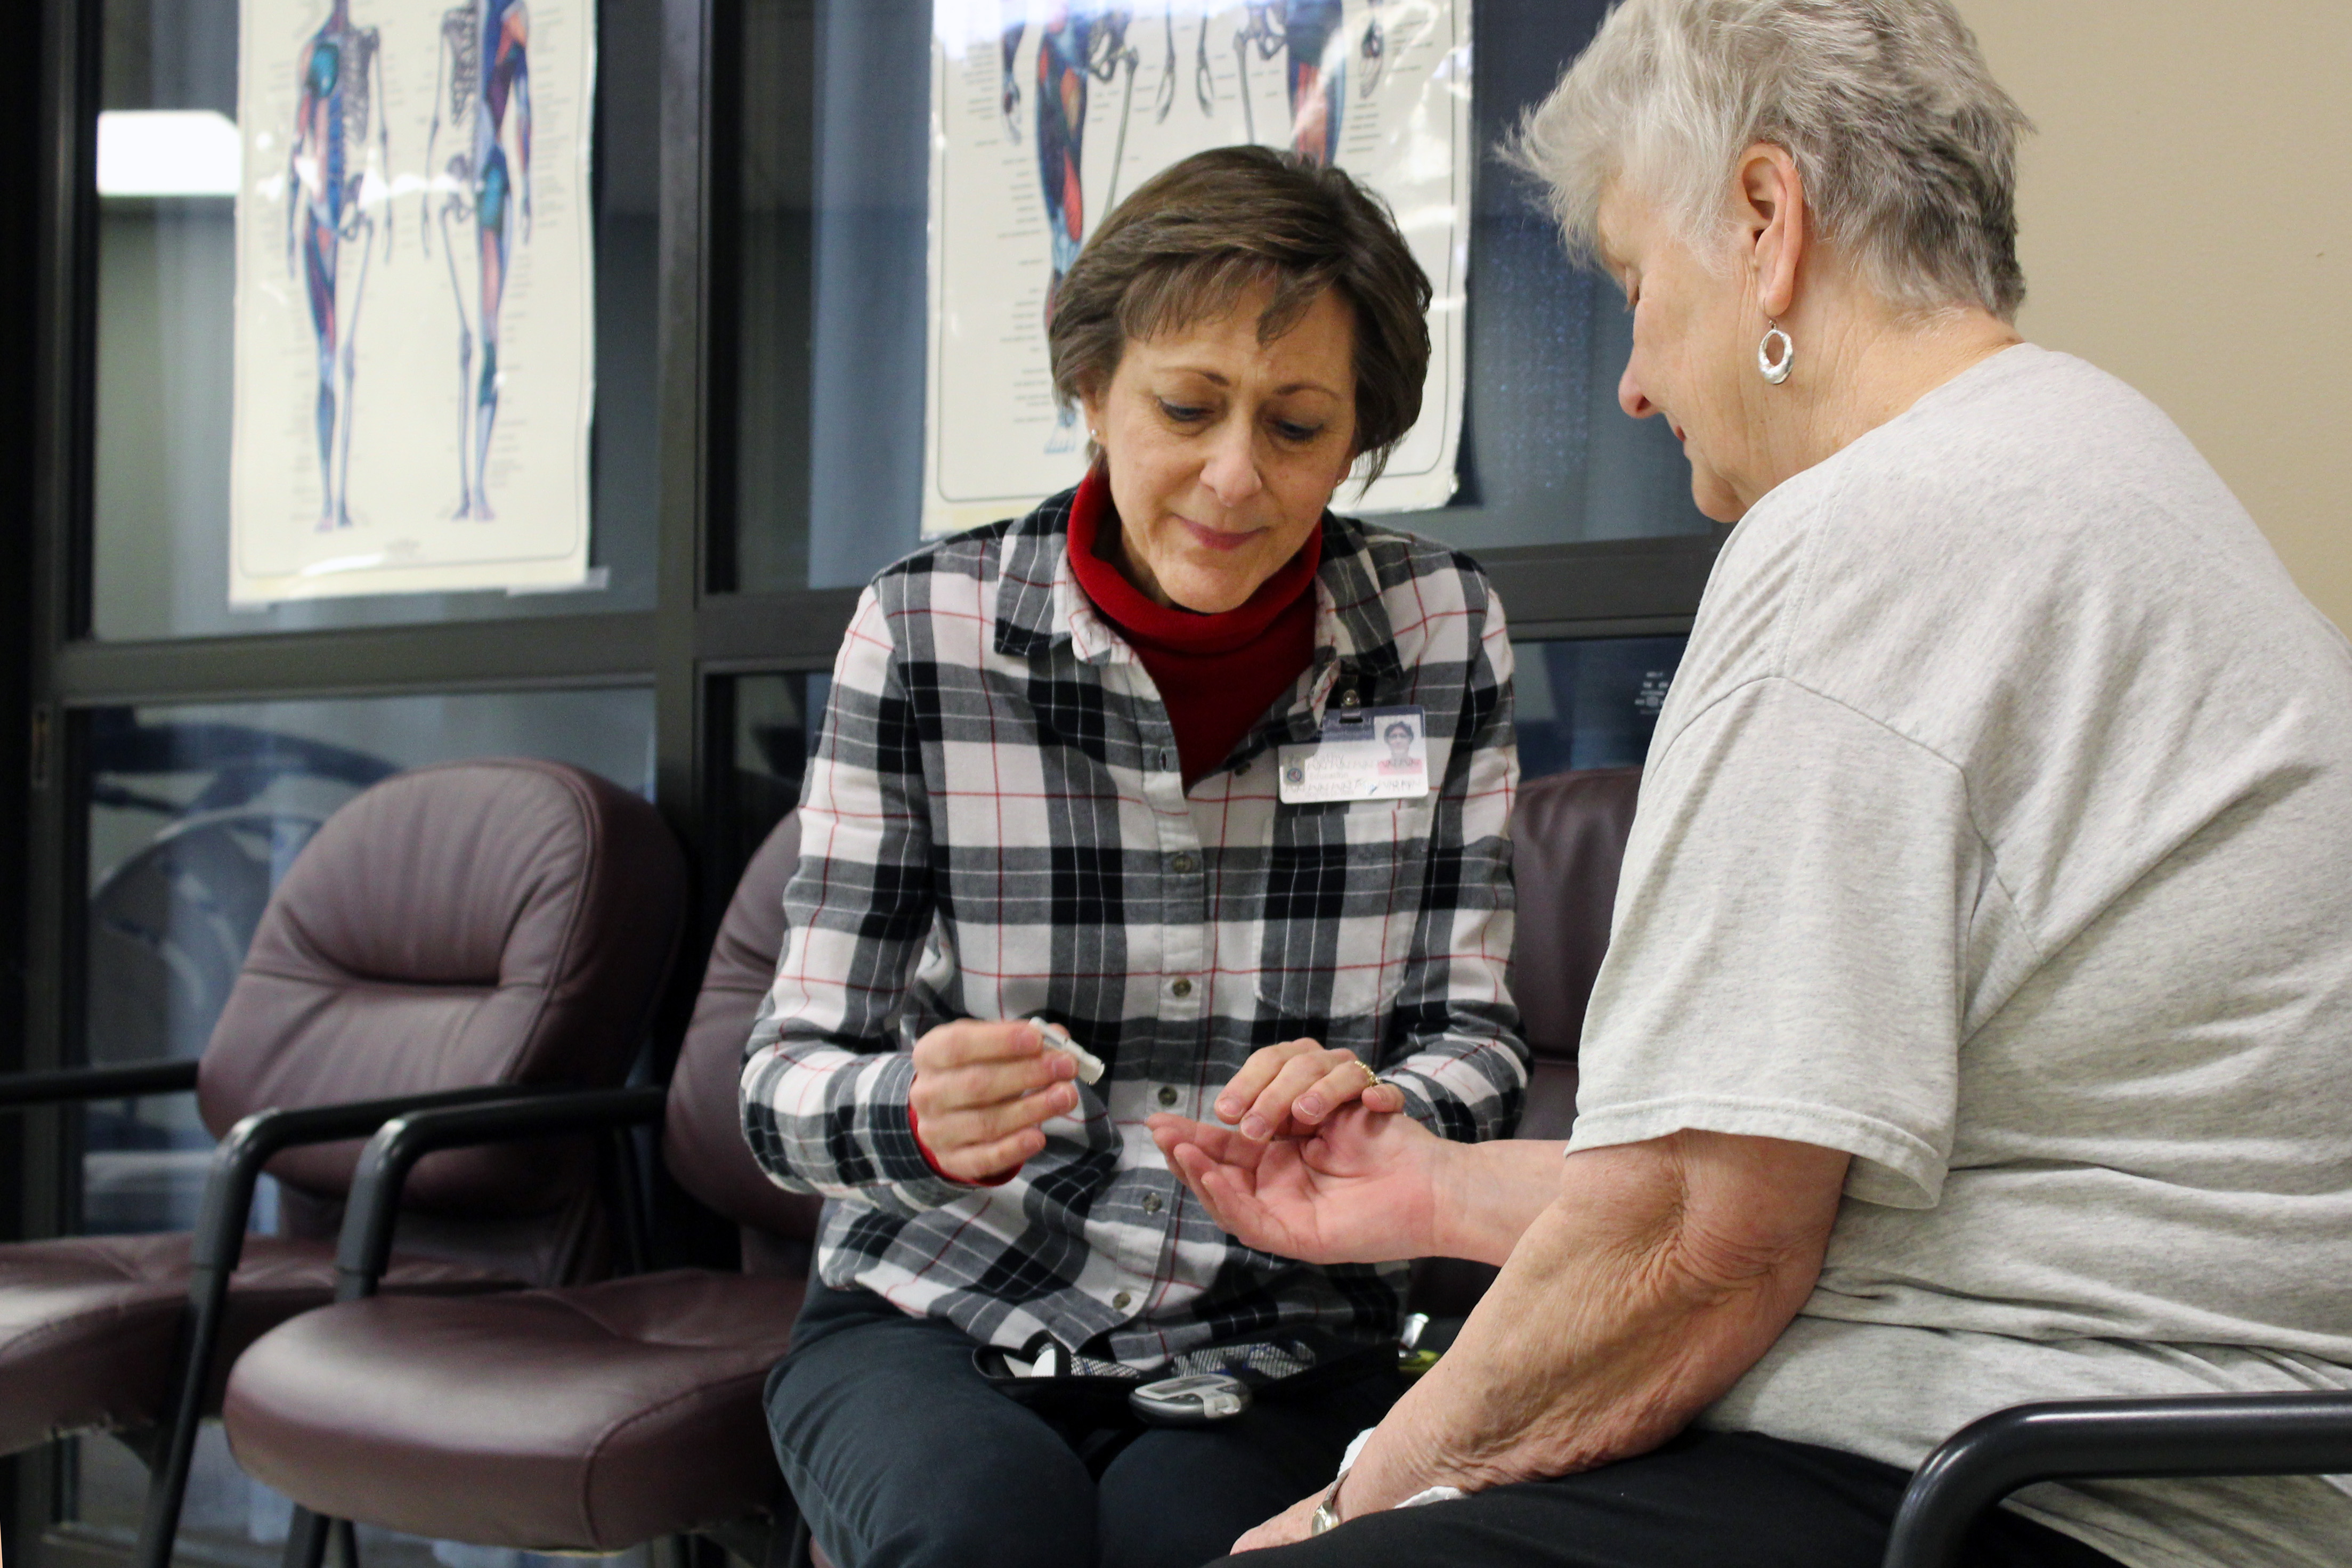 Kathy Strom helps a diabetic patient with a blood sugar test